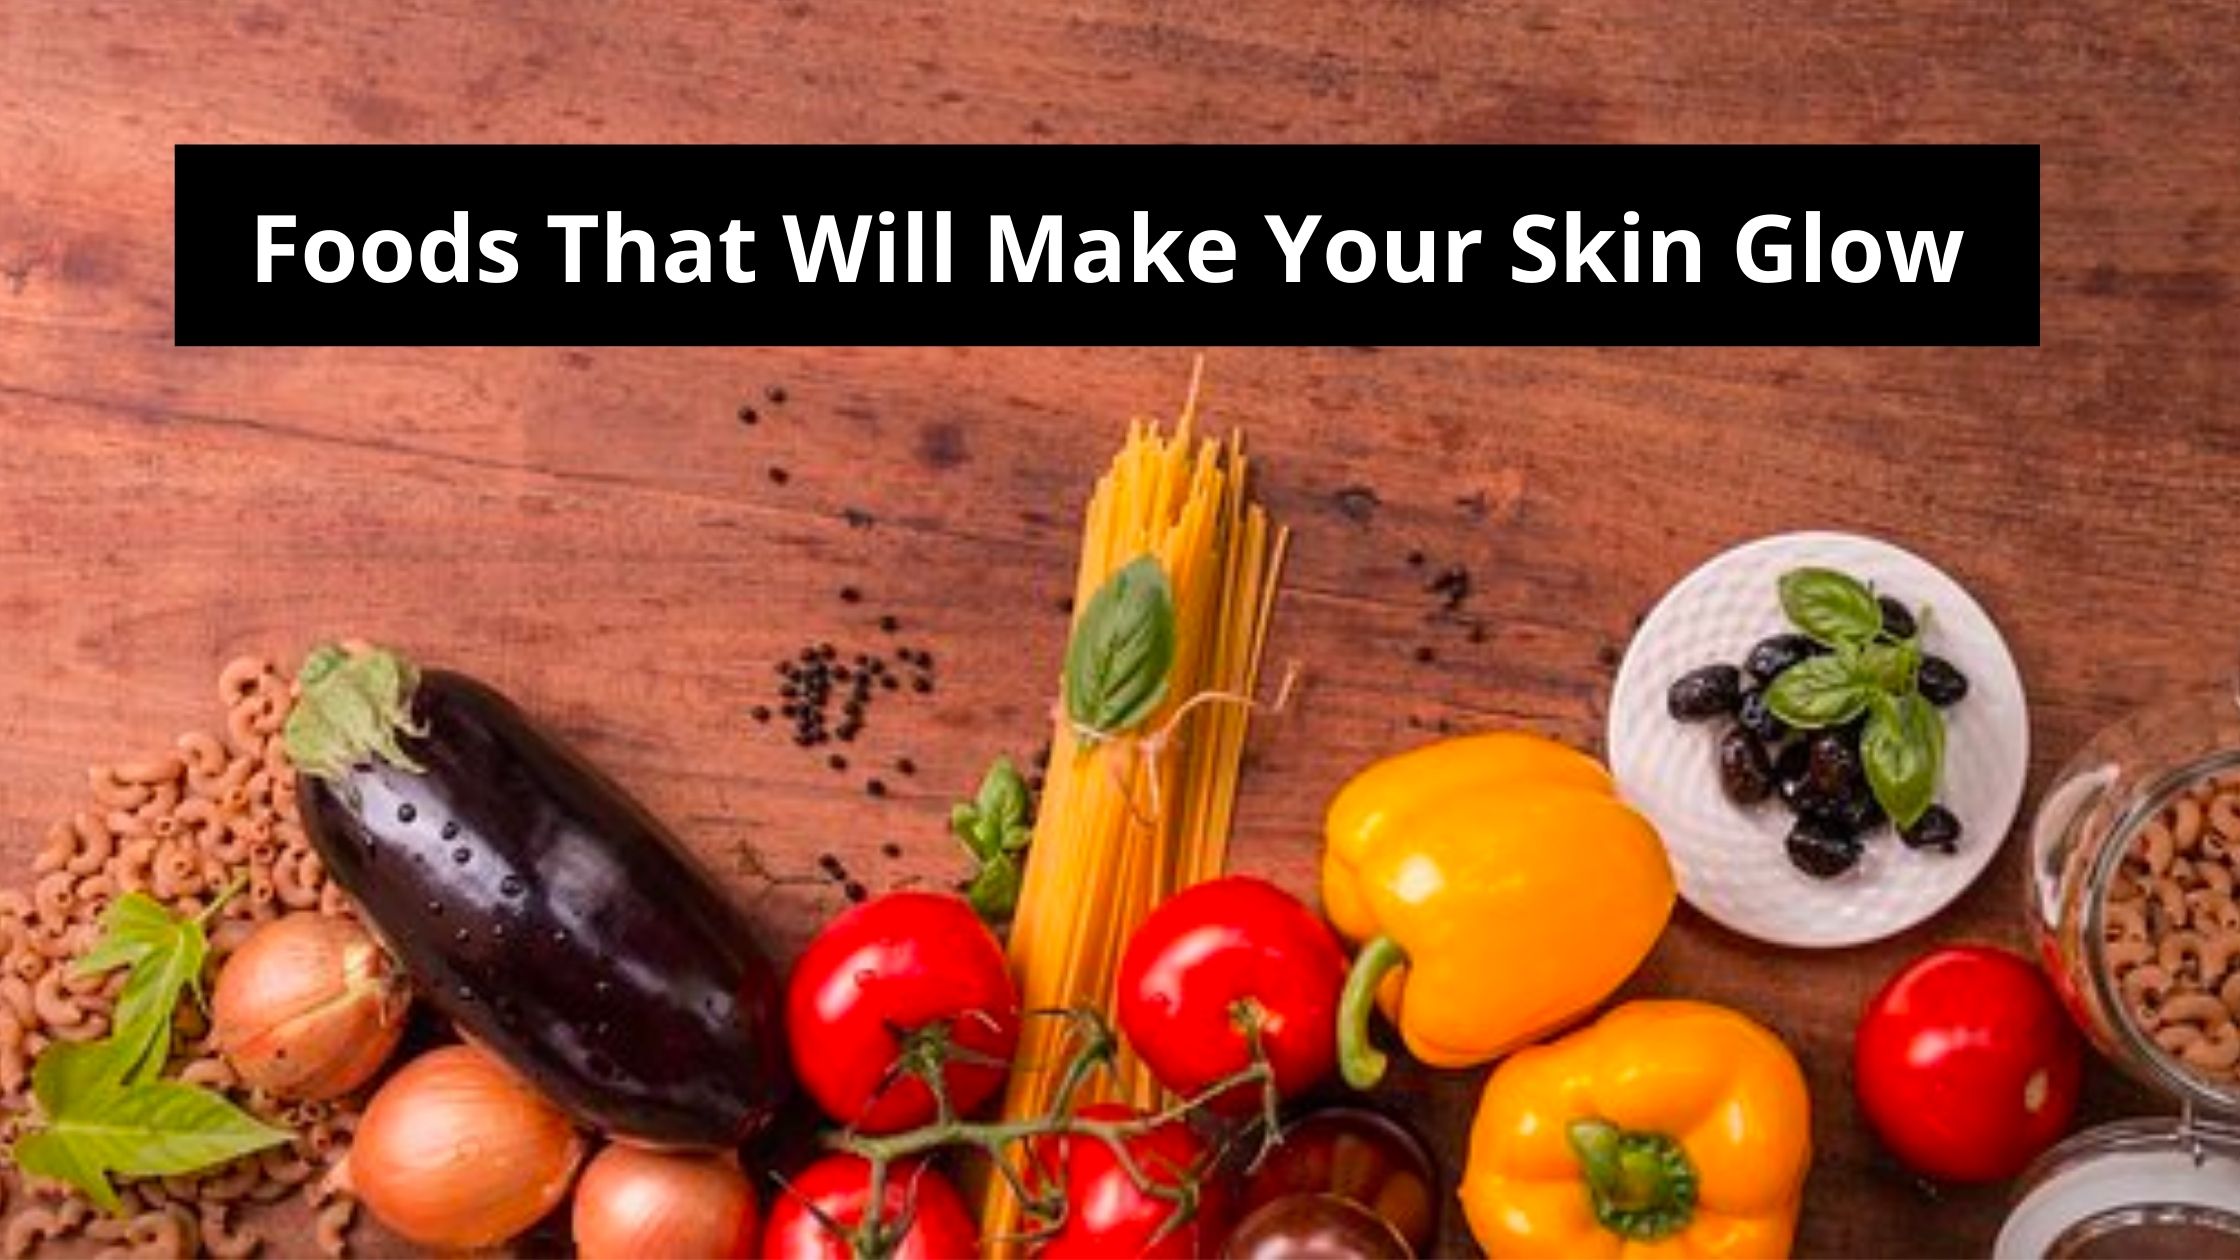 Foods That Will Make Your Skin Glow